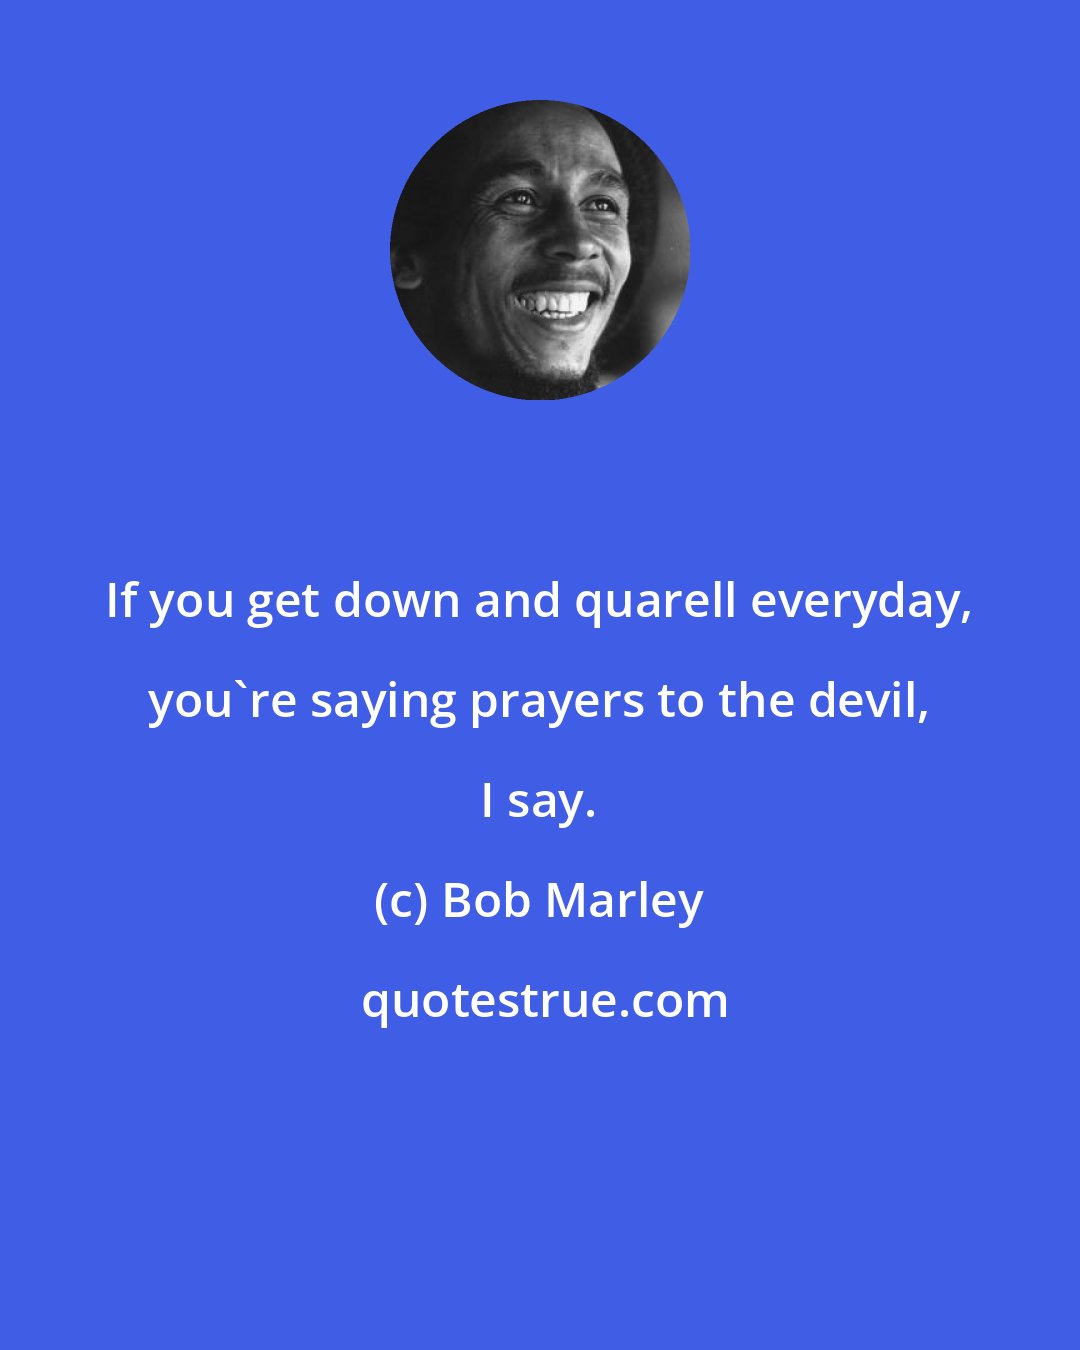 Bob Marley: If you get down and quarell everyday, you're saying prayers to the devil, I say.